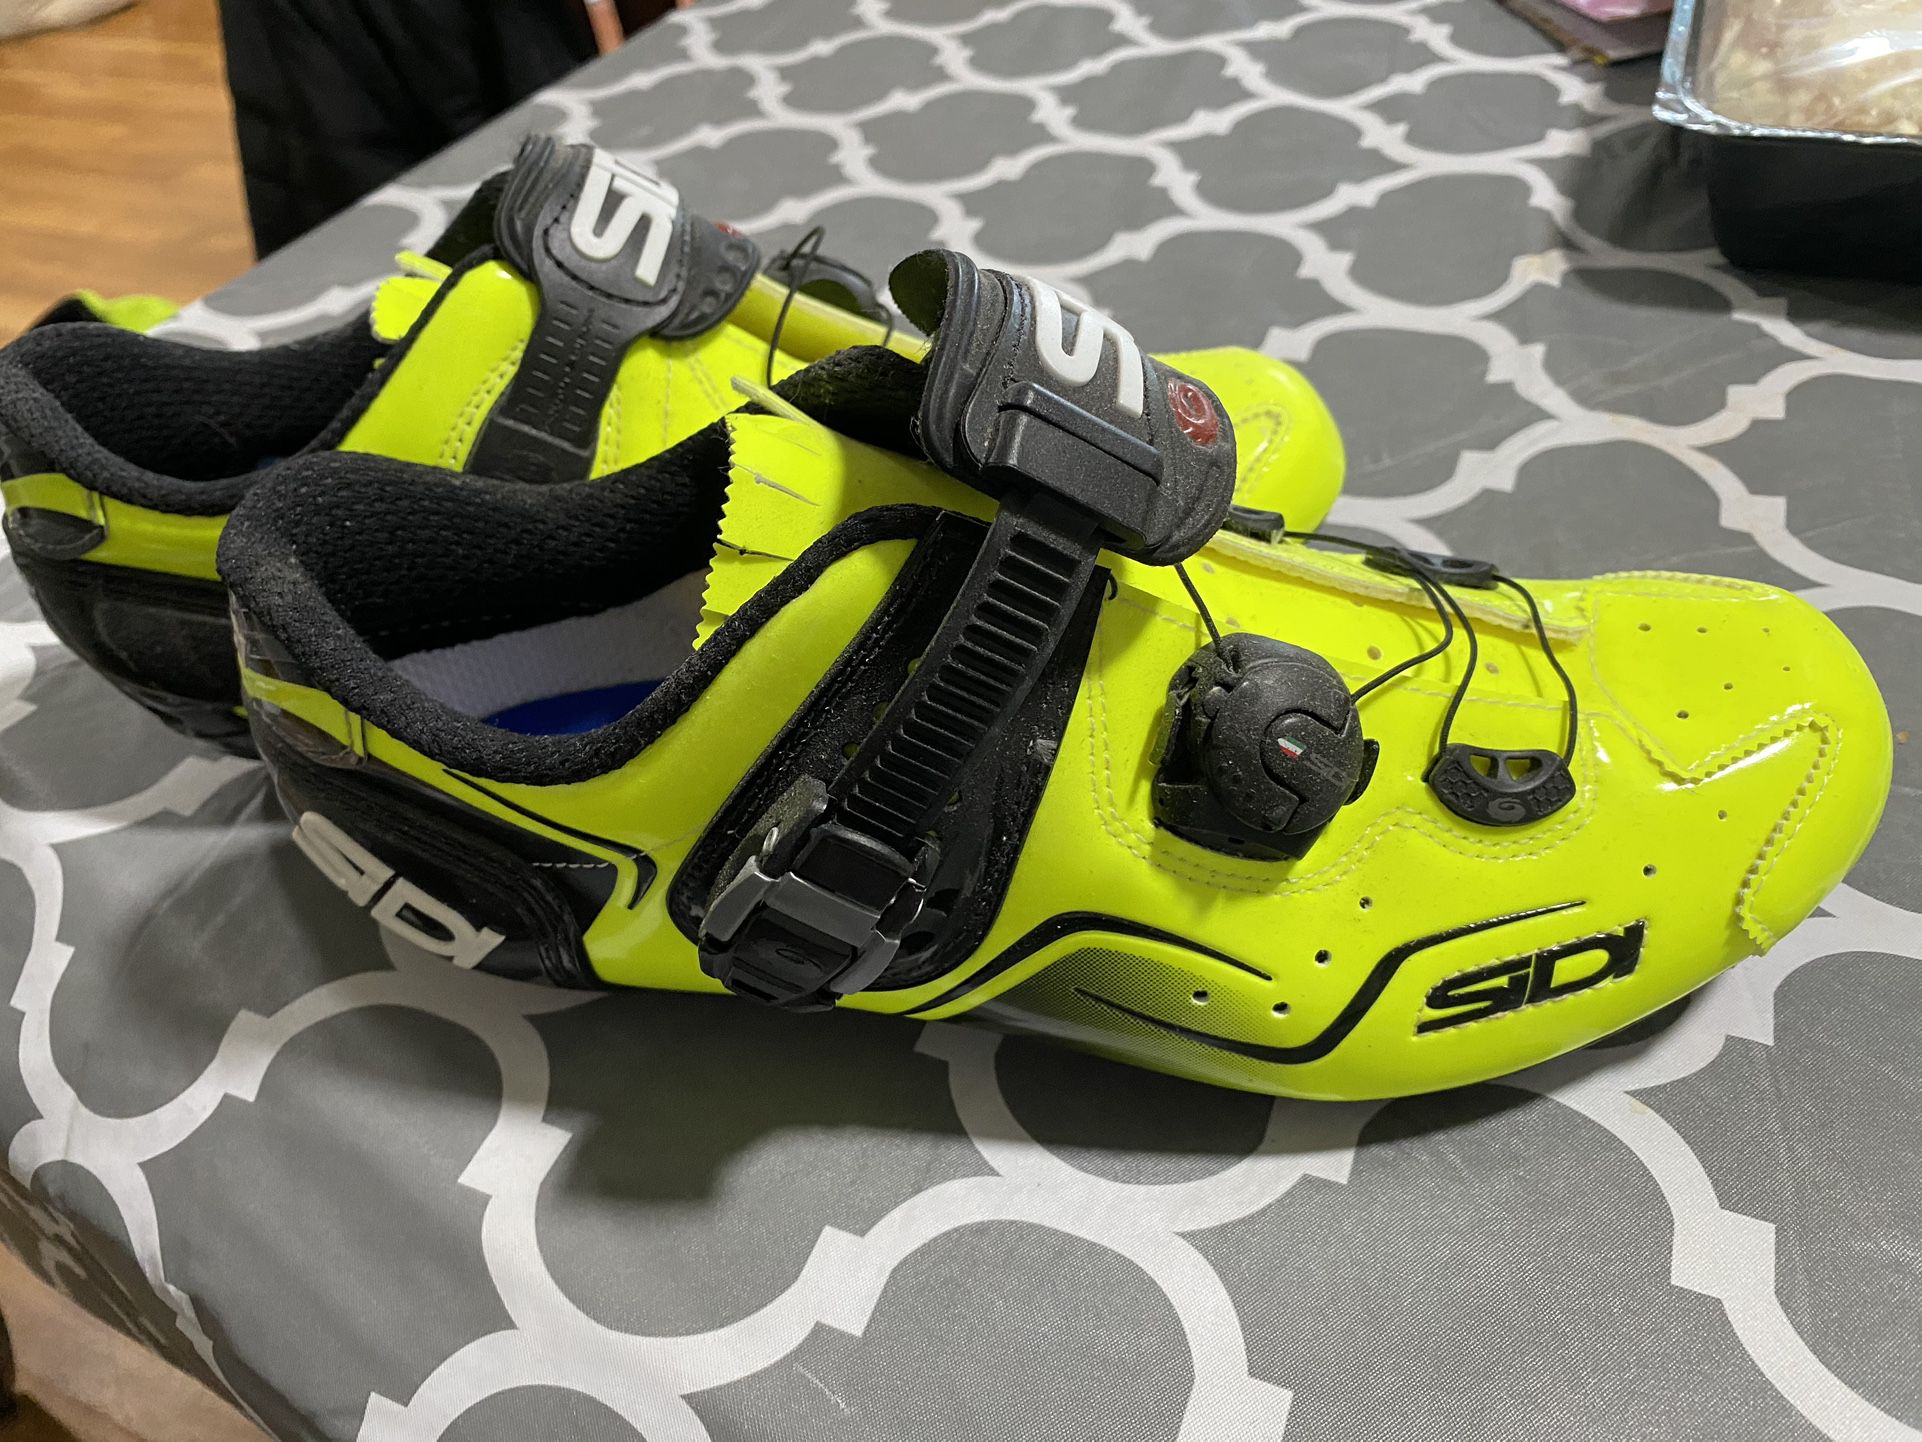 Sidi Kaos Carbon Road Shoes Size Men 42 for in WA - OfferUp